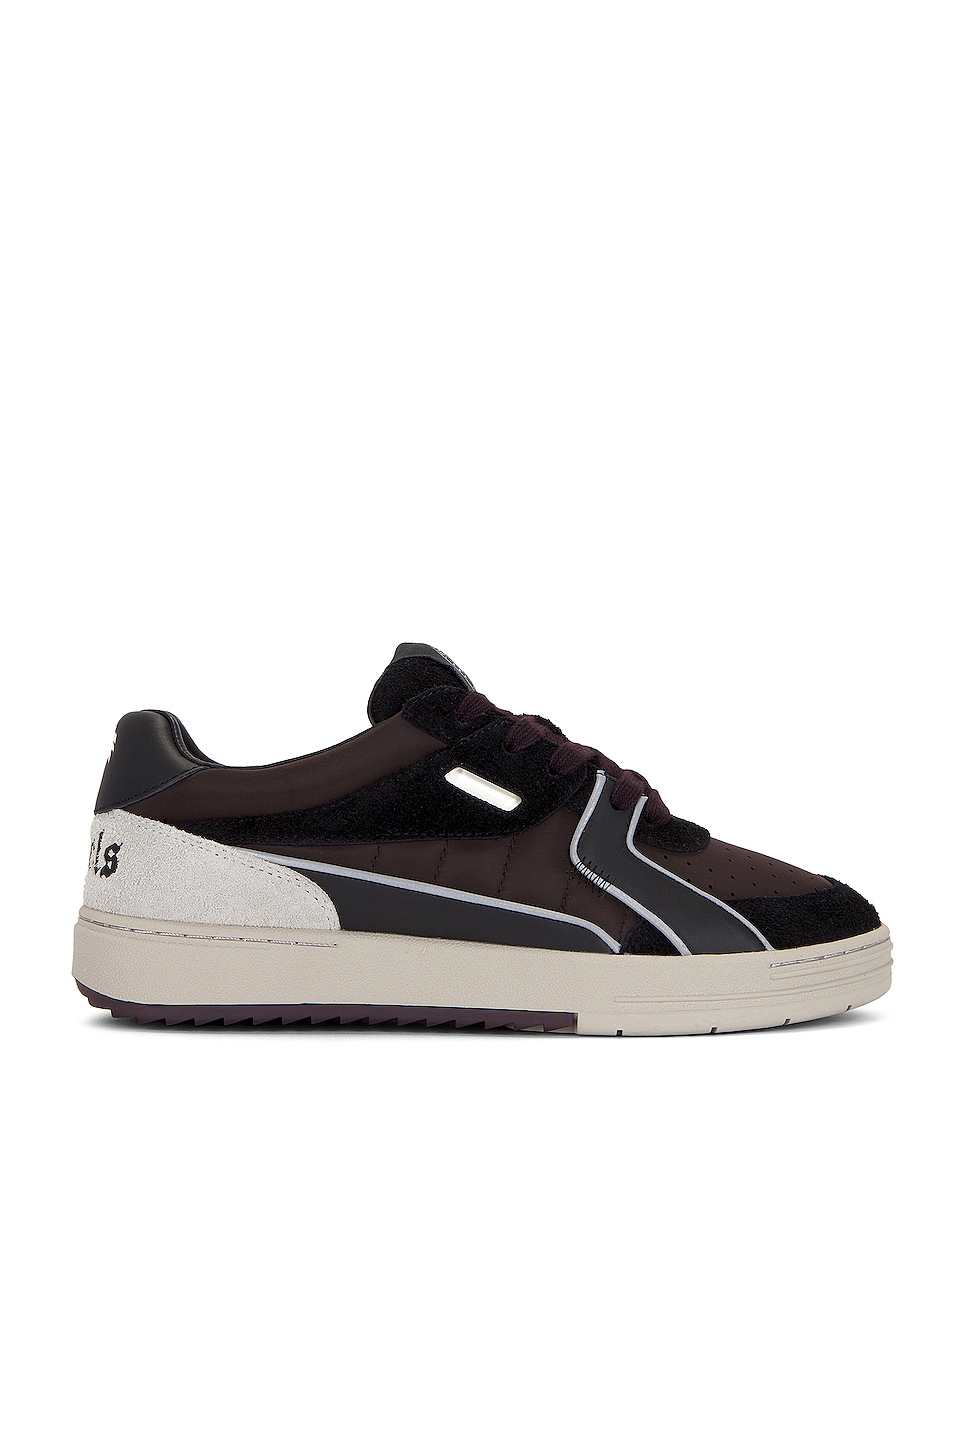 Image 1 of Palm Angels Palm University Sneaker in Black